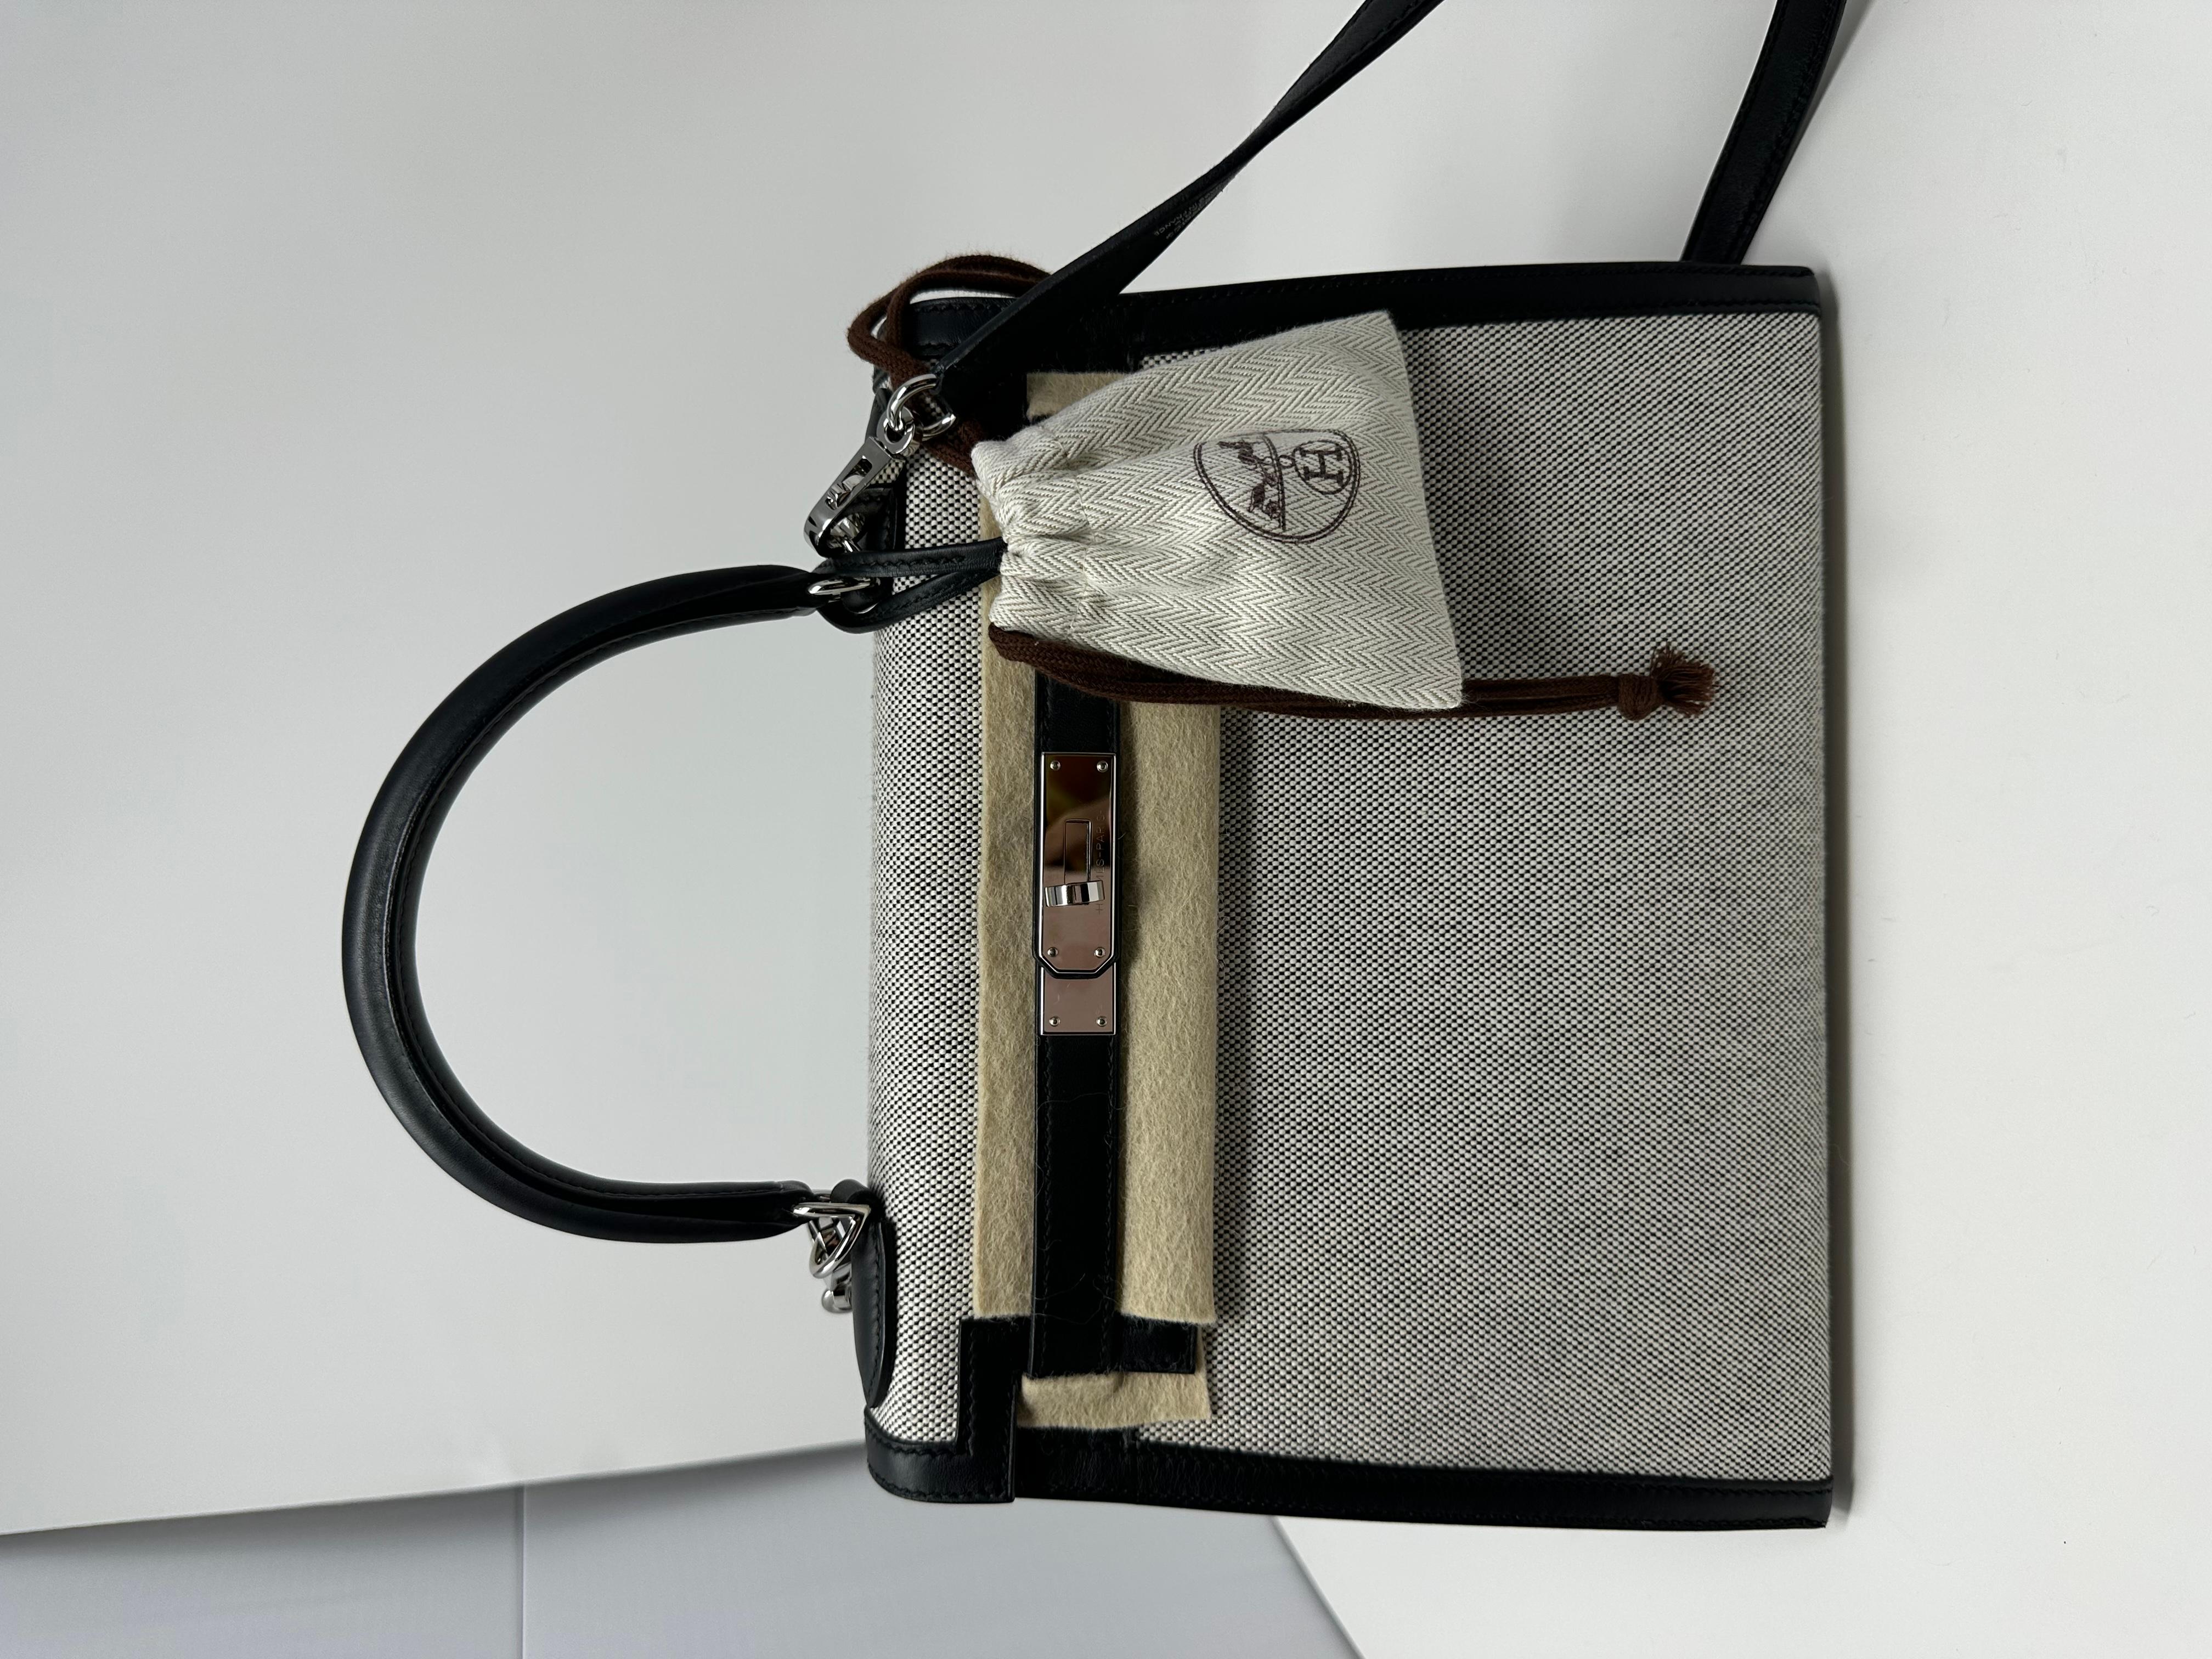 Hermès Black black Swift and Toile Sellier Kelly 28 Palladium Hardware, 2021
The interior is lined in black swift leather
Includes lock, two keys, clochette, clochette dustbag, shoulder strap, shoulder strap dustbag, felt protector, dustbag,